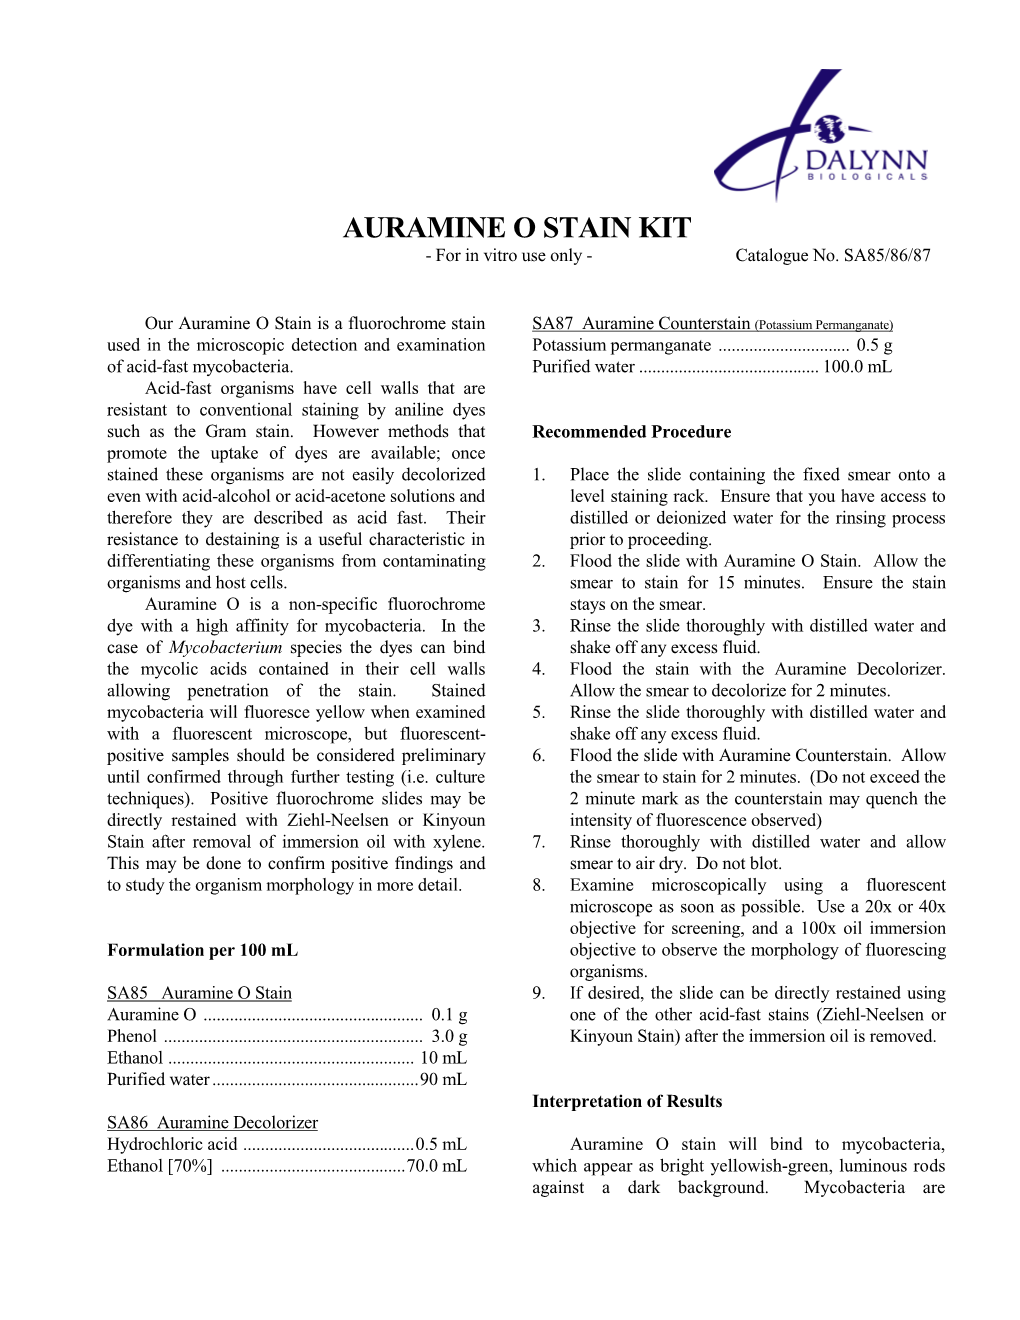 AURAMINE O STAIN KIT - for in Vitro Use Only - Catalogue No